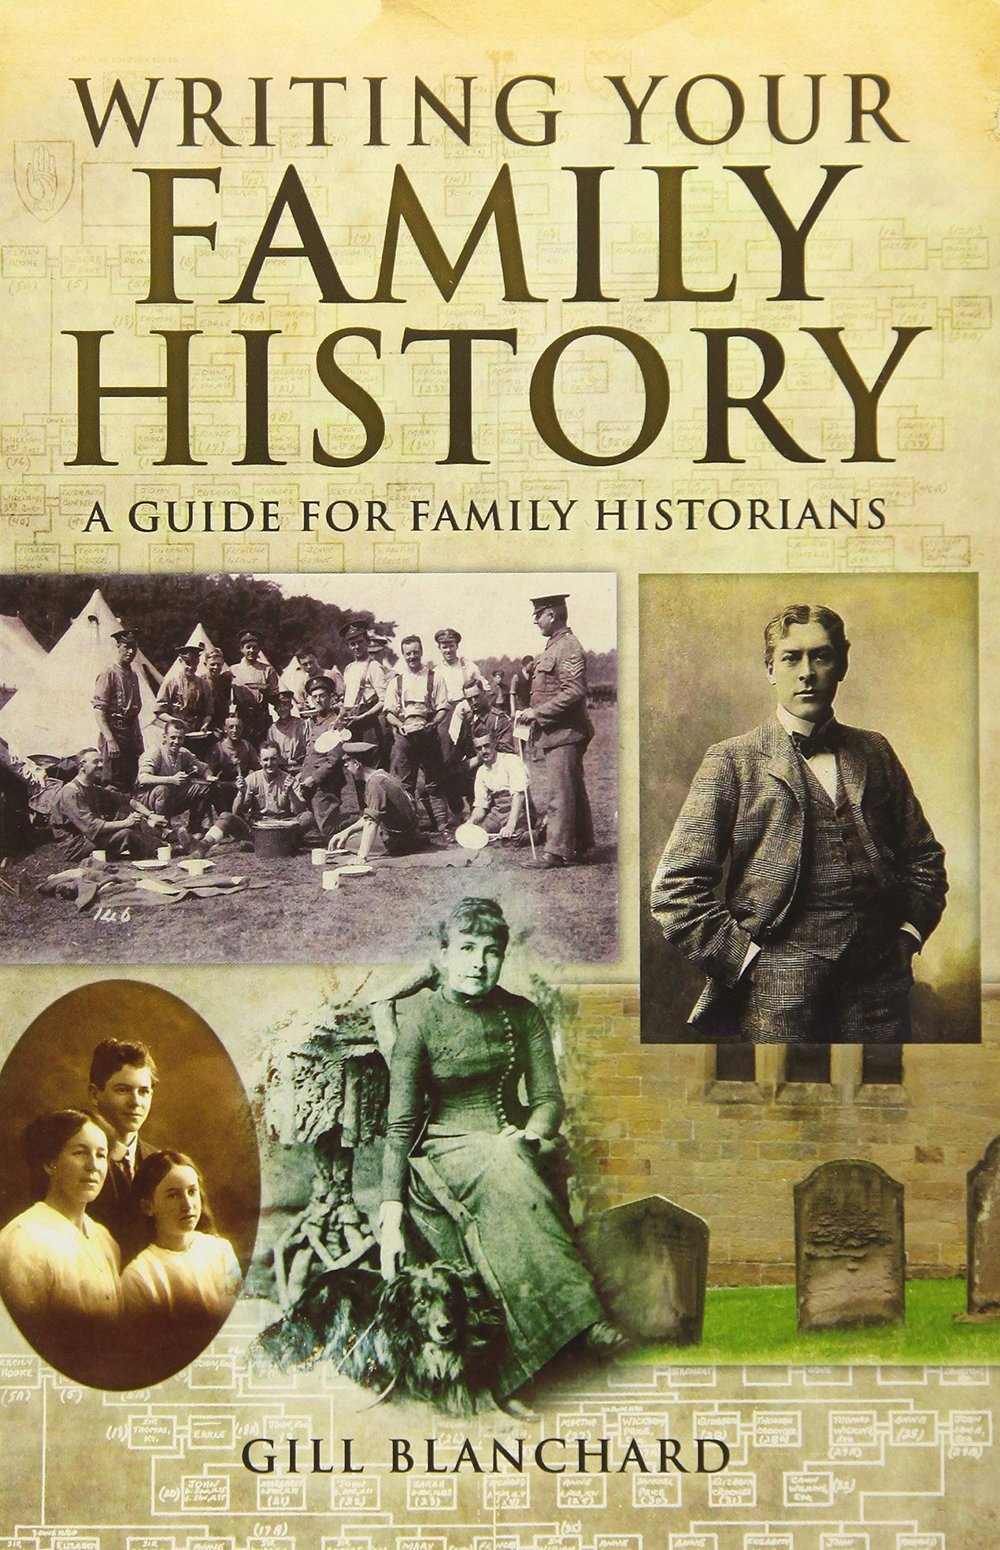 Writing Your Family History: A Guide for Family Historians by Gill Blanchard